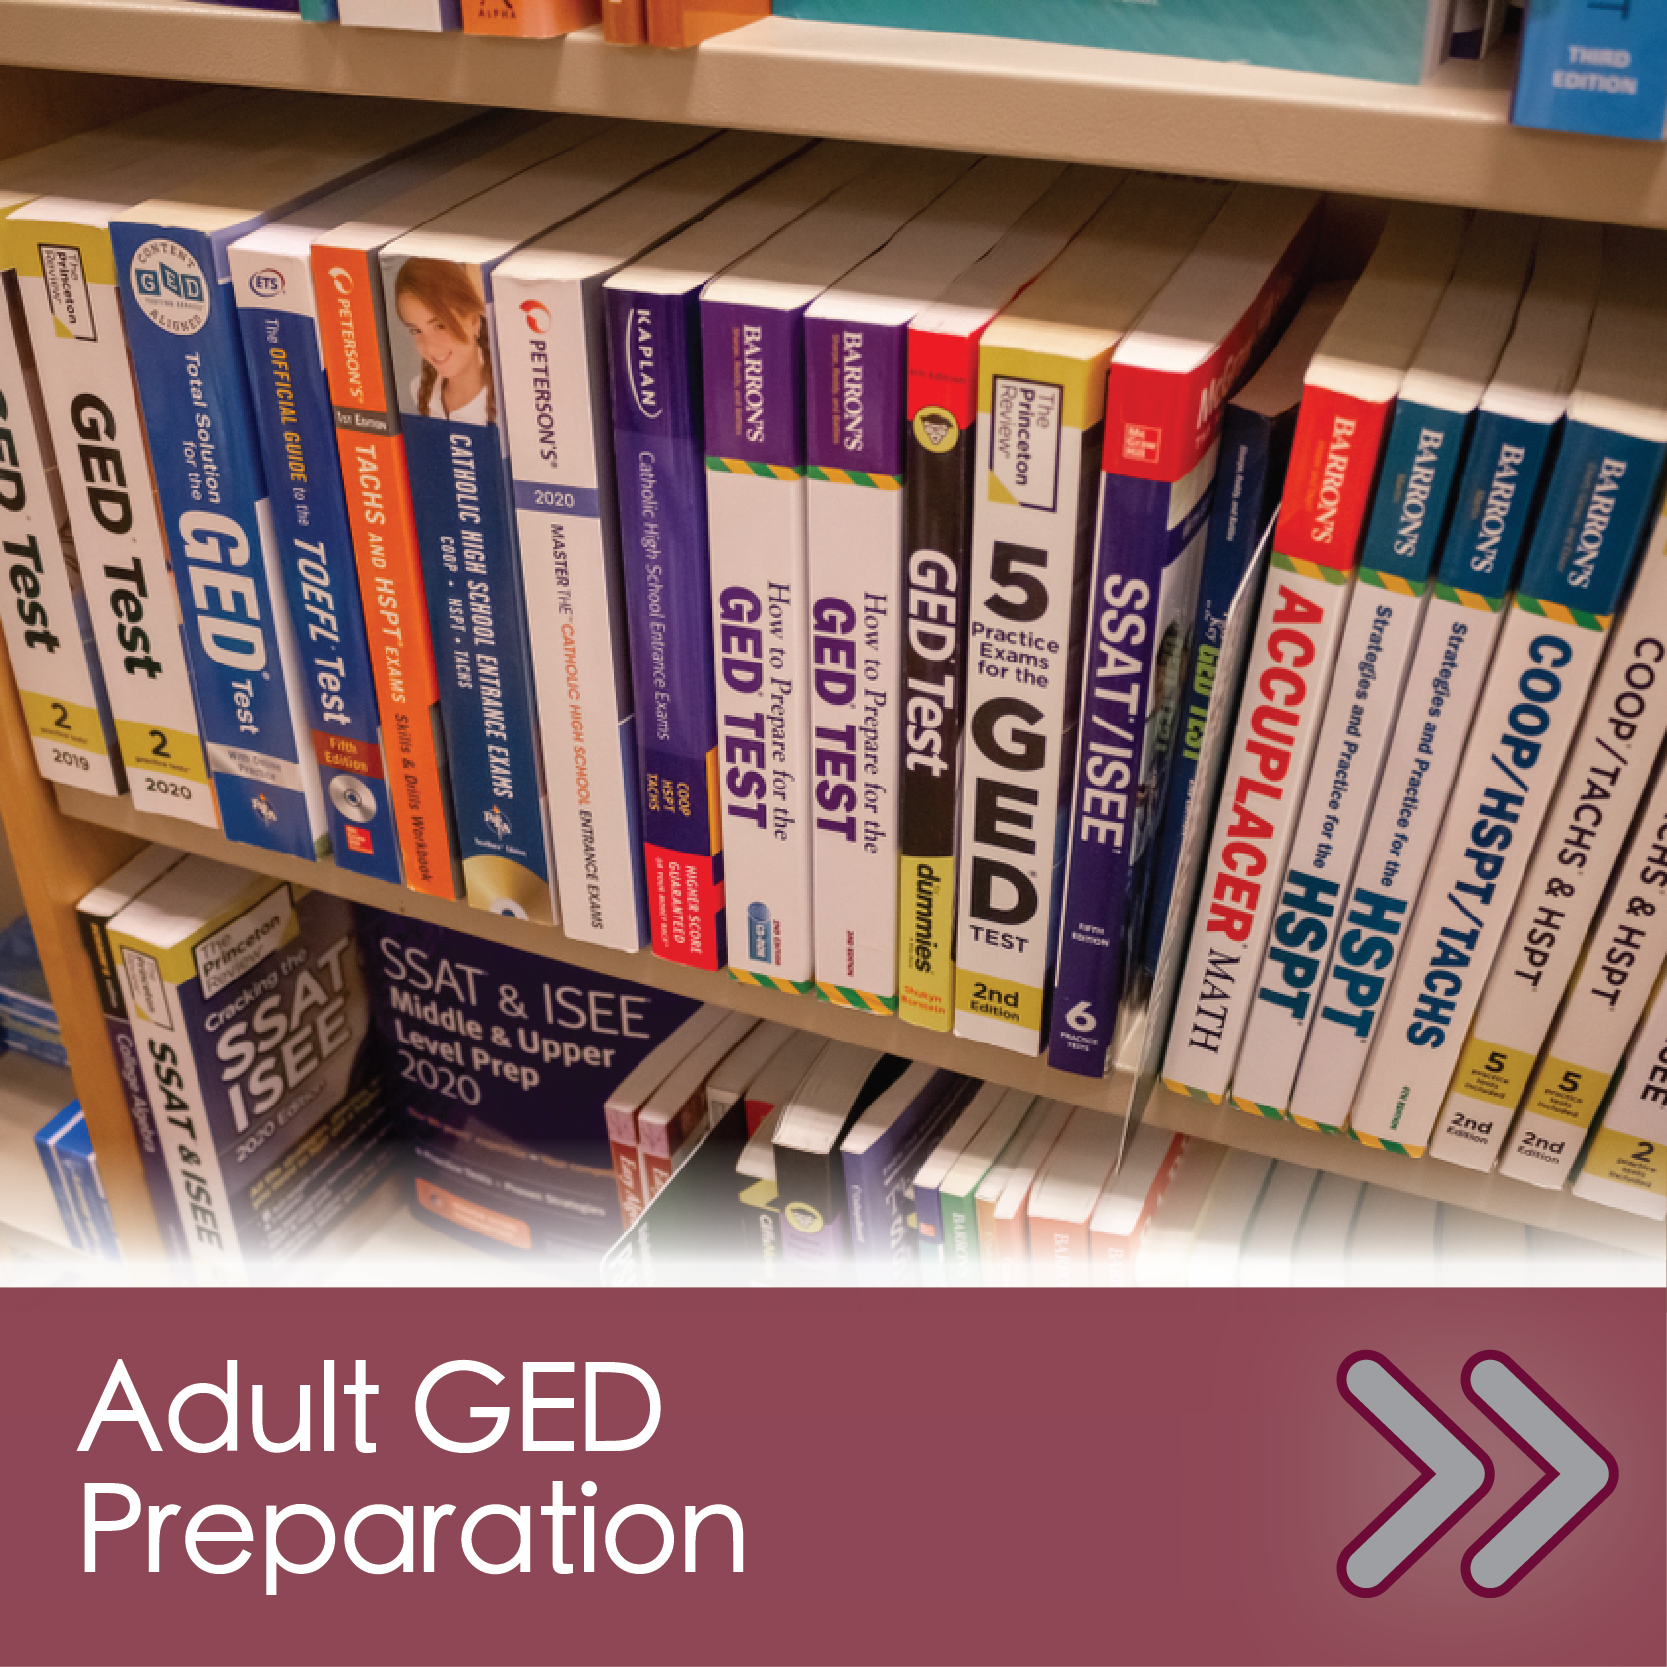 DCMO BOCES Adult GED Preparation